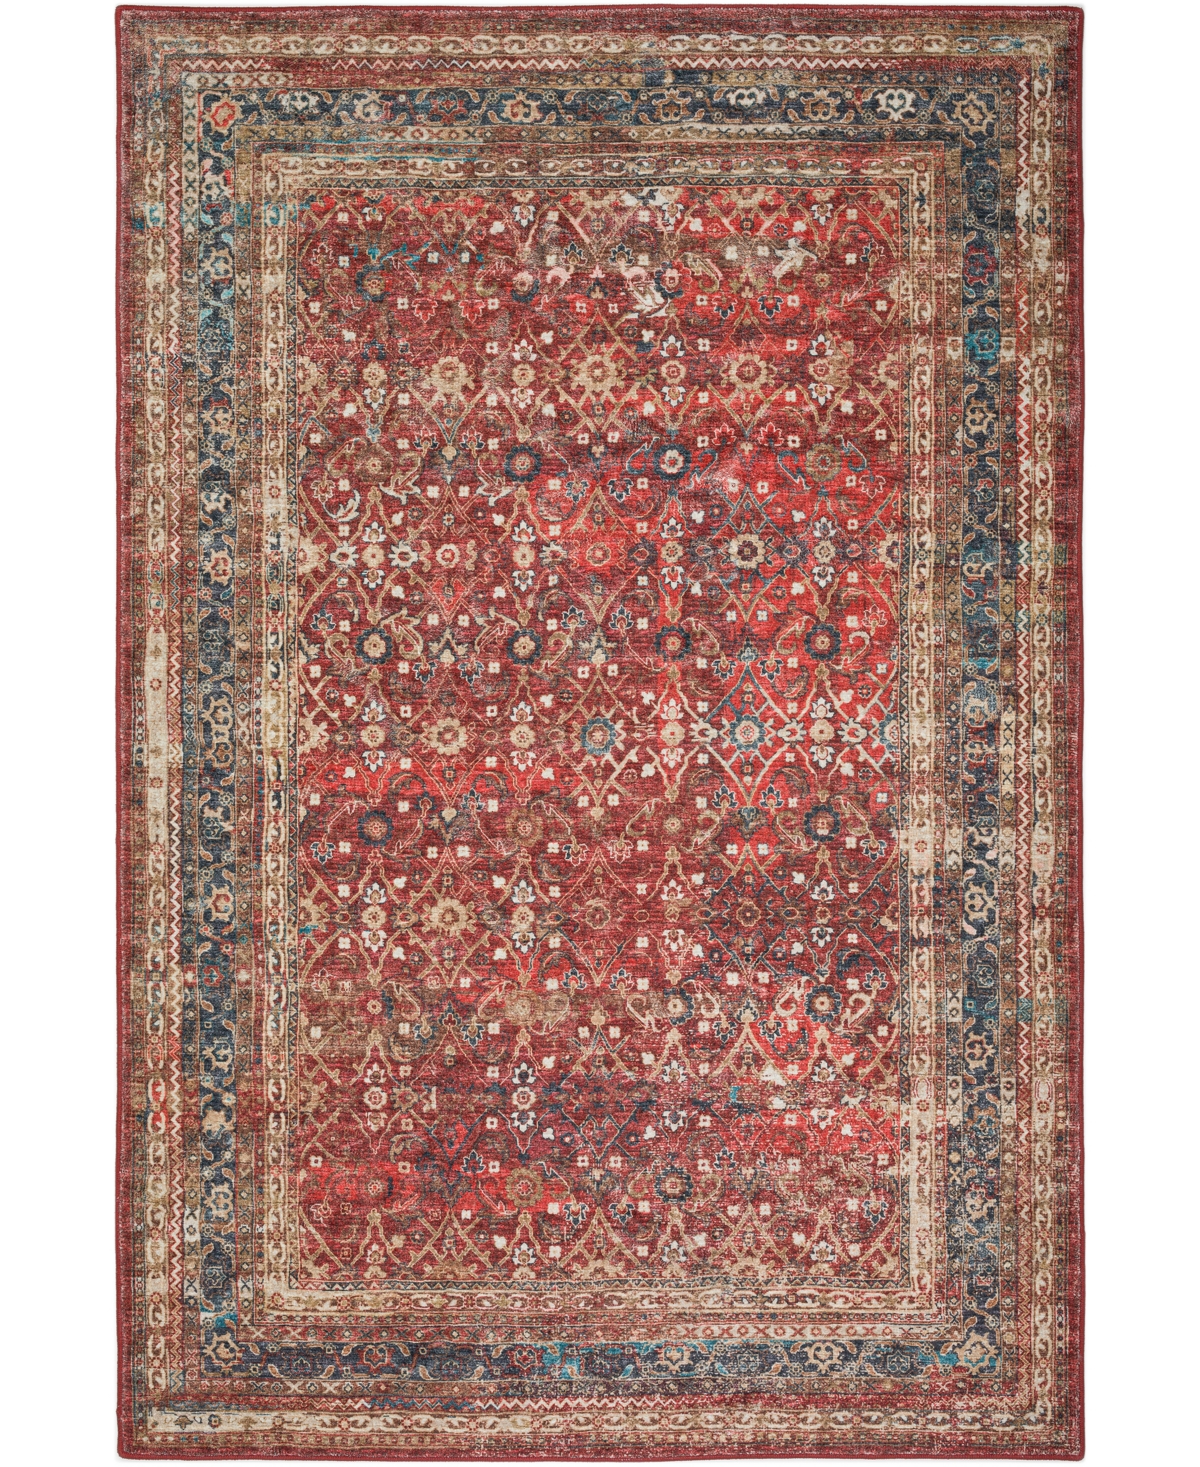 D Style Basilic Bas7 2' X 3' Area Rug In Red